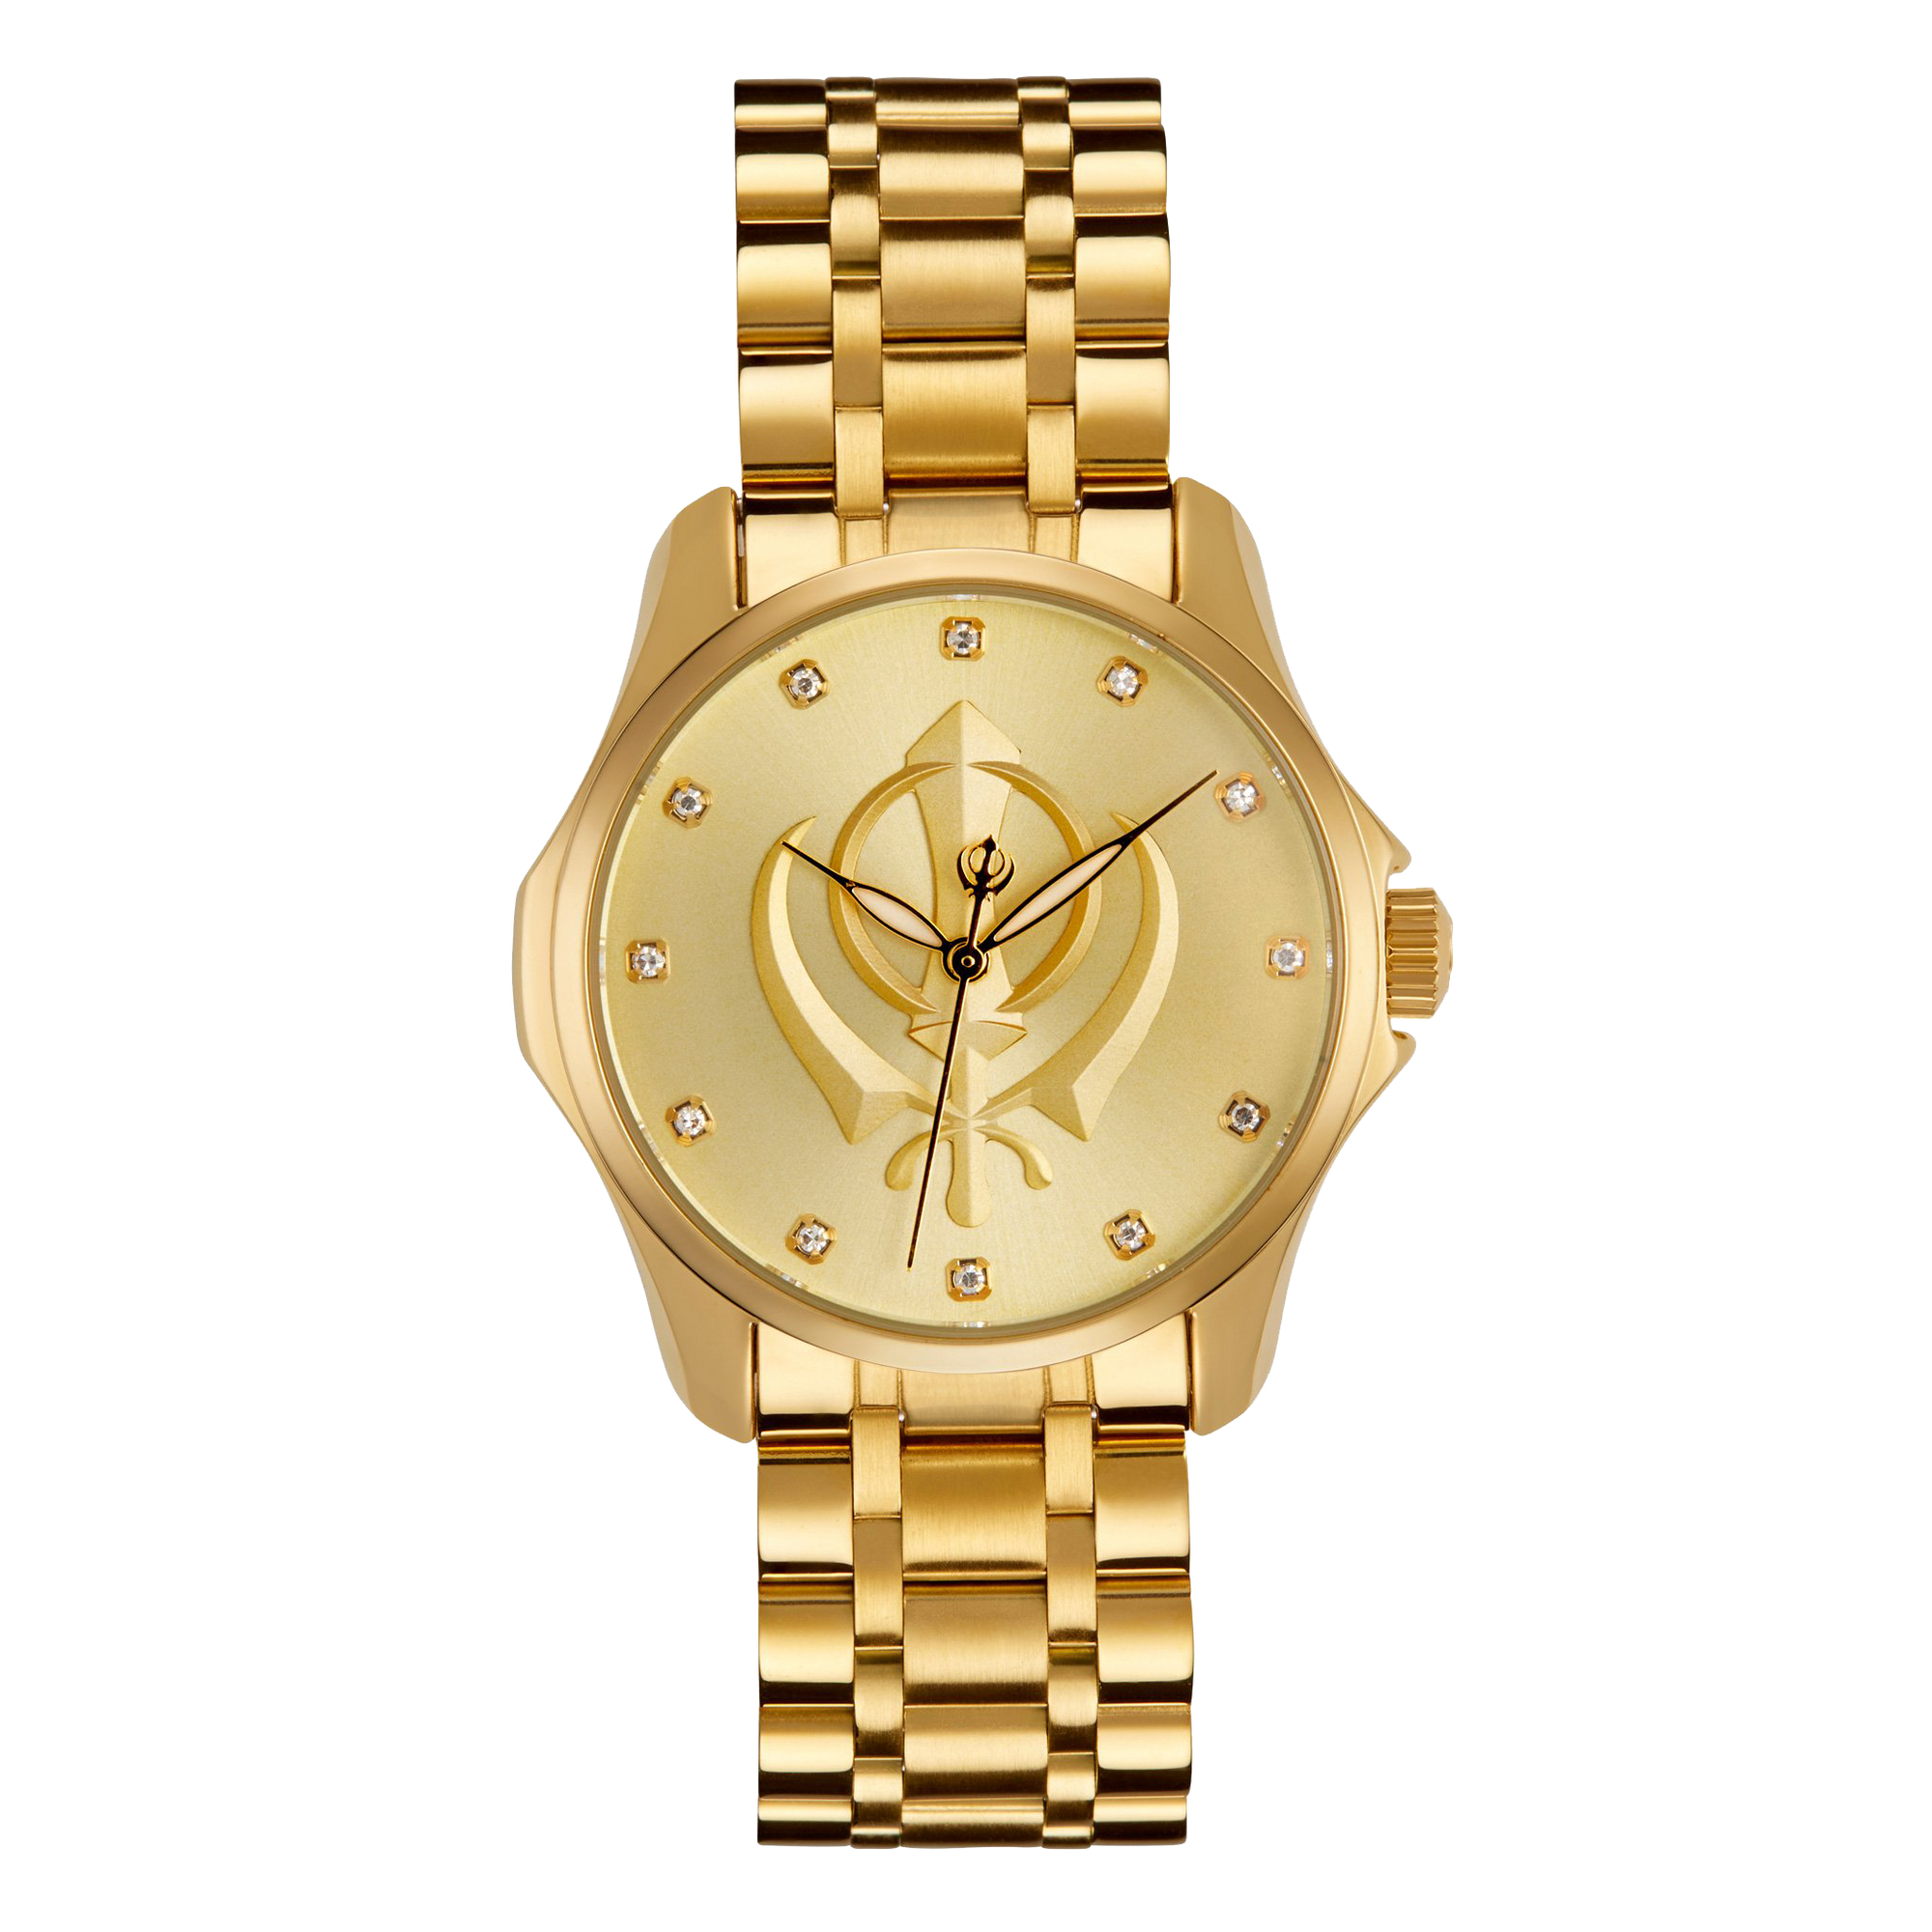 House of Khalsa Heritage Antique Gold Luxury Women's Sikh Watch with Khanda Symbol - Authentic Stainless Steel Design